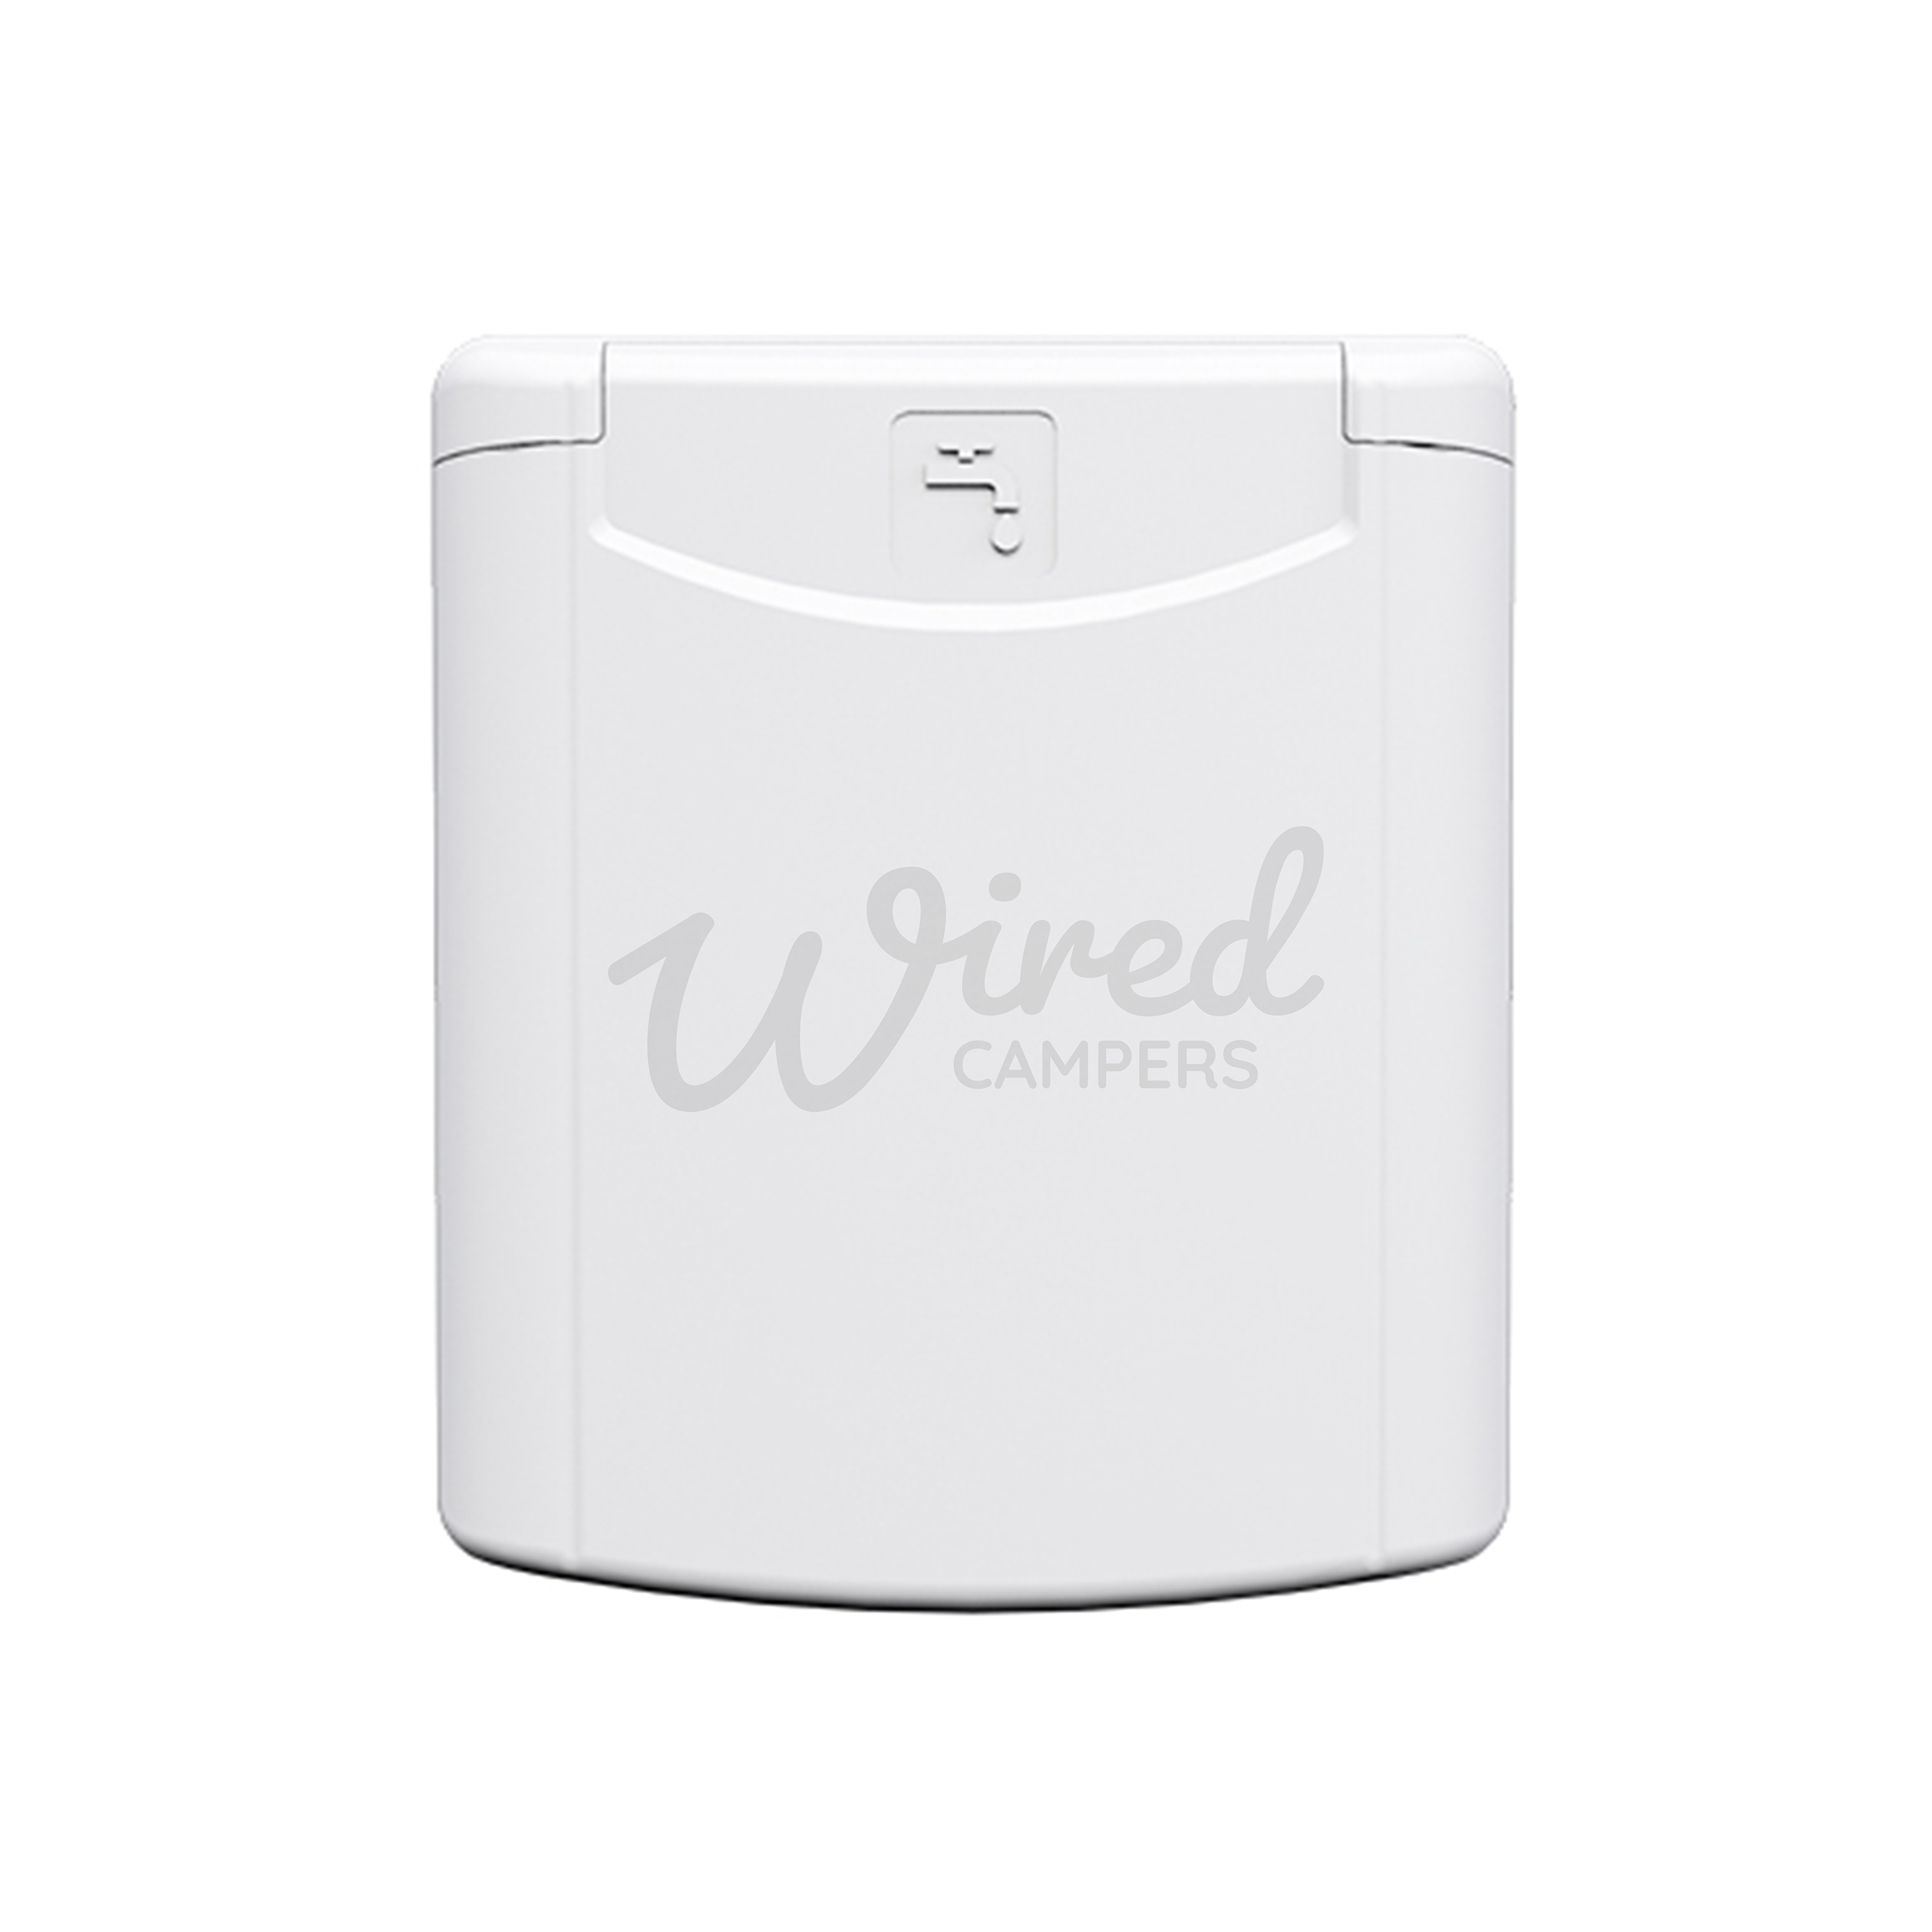 Wired Campers Limited Camper Van Flush Lockable Water Filler Point - Magnetic Flap - White